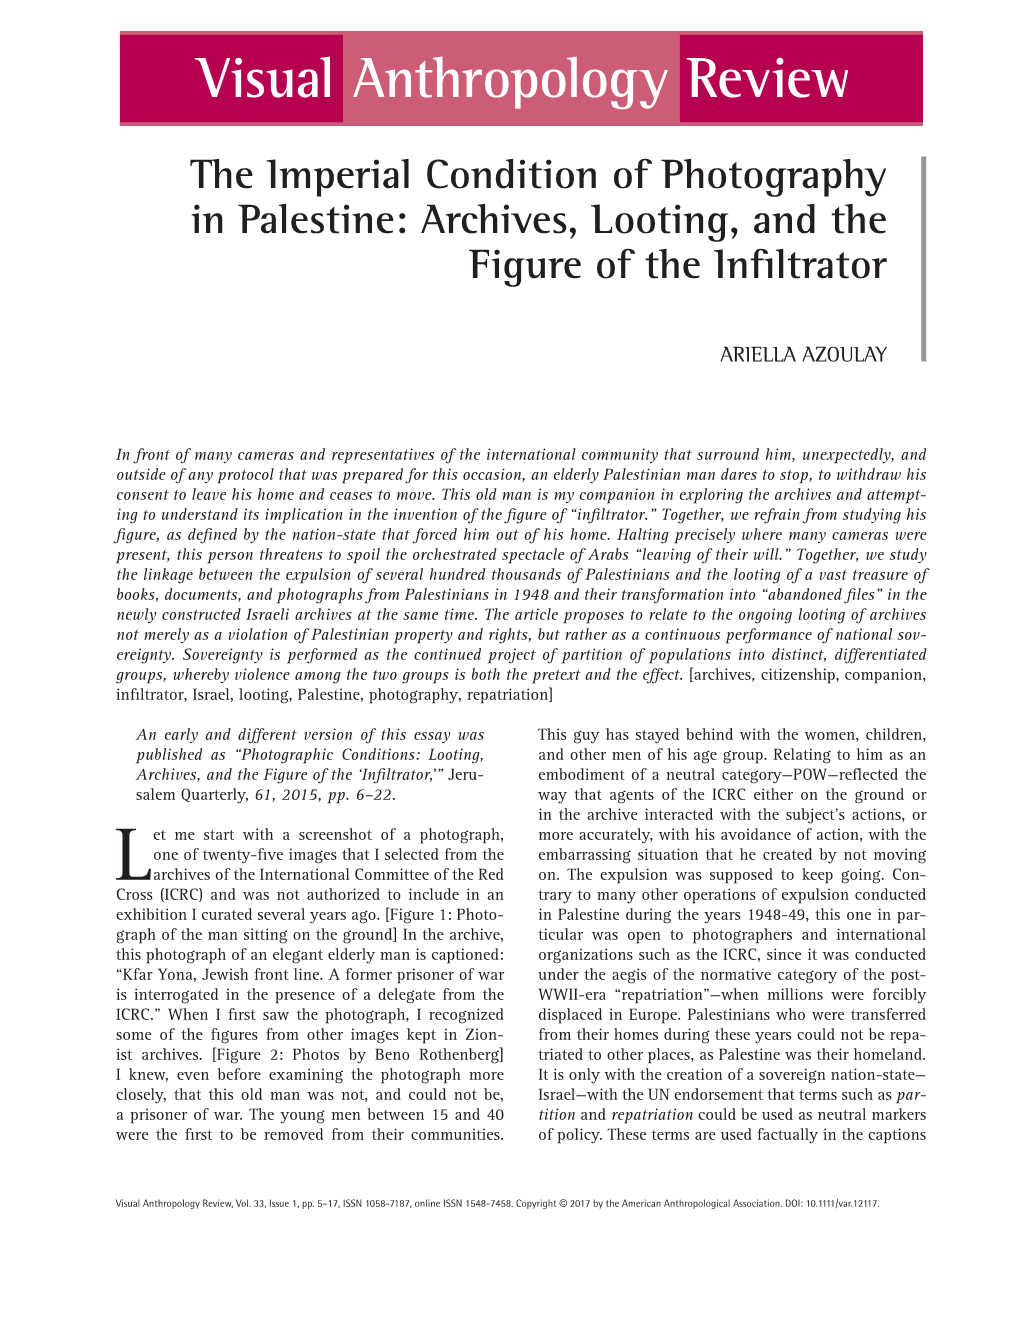 The Imperial Condition of Photography in Palestine: Archives, Looting, and the Figure of the Infiltrator